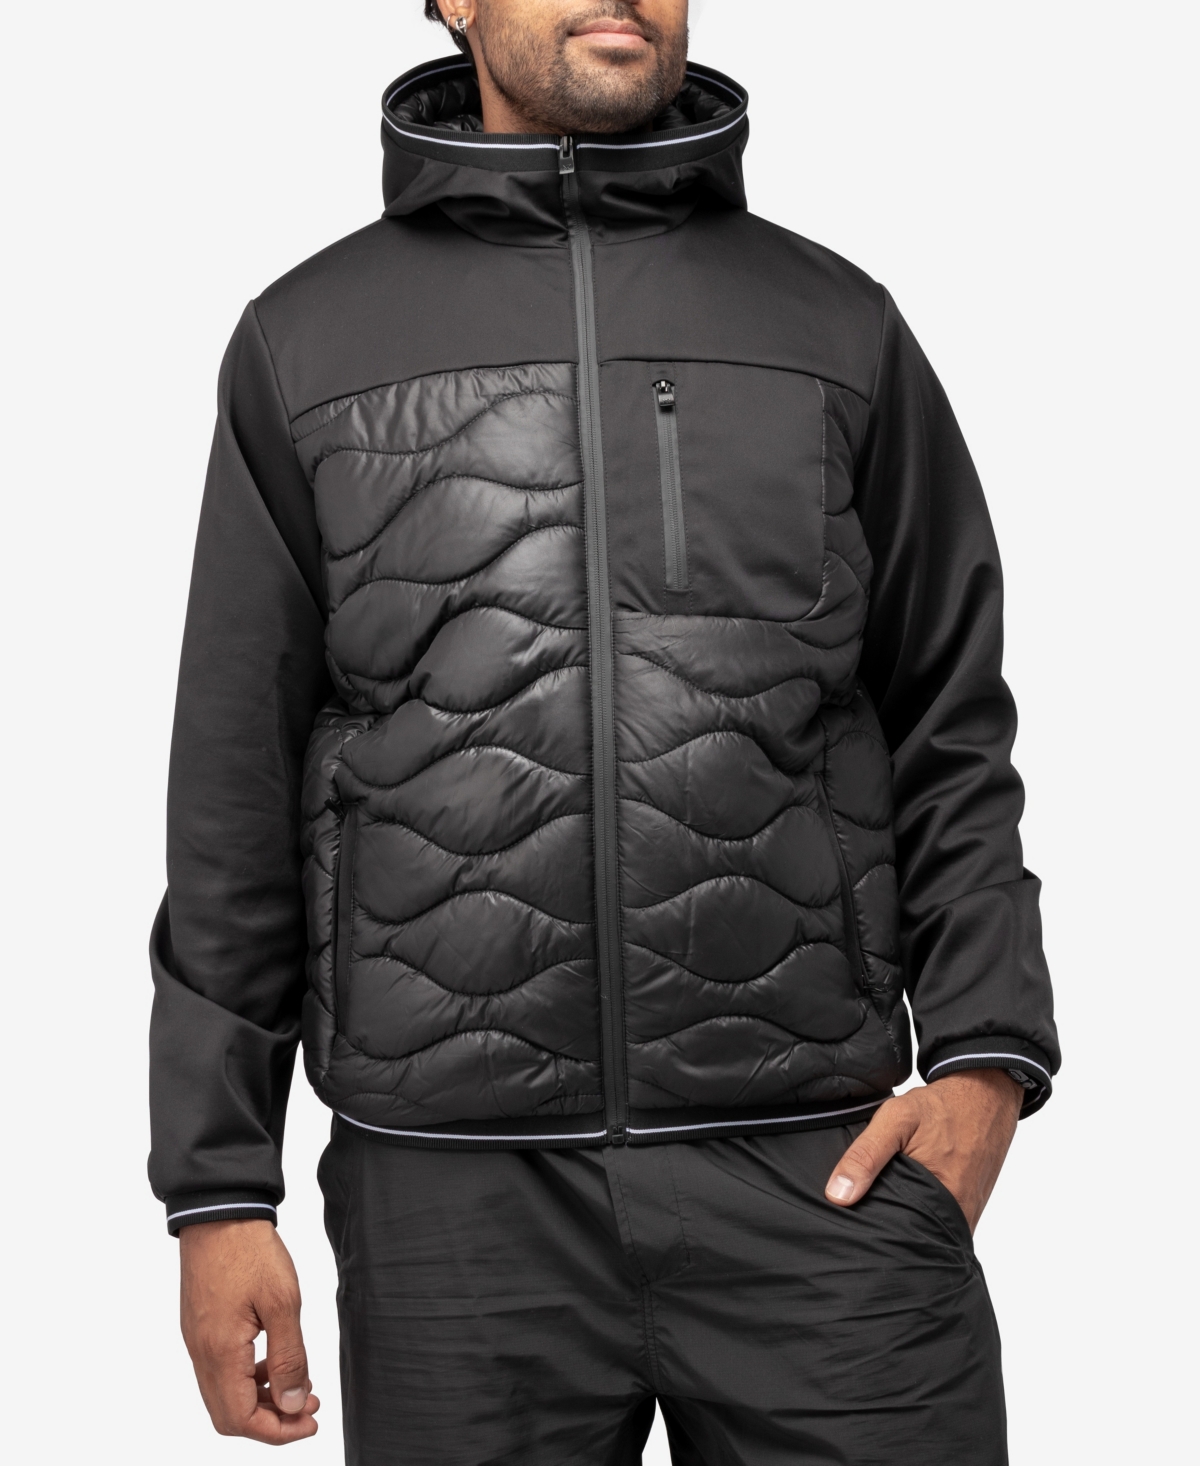 X-ray Men's Quilted Jacket With Hood In Black